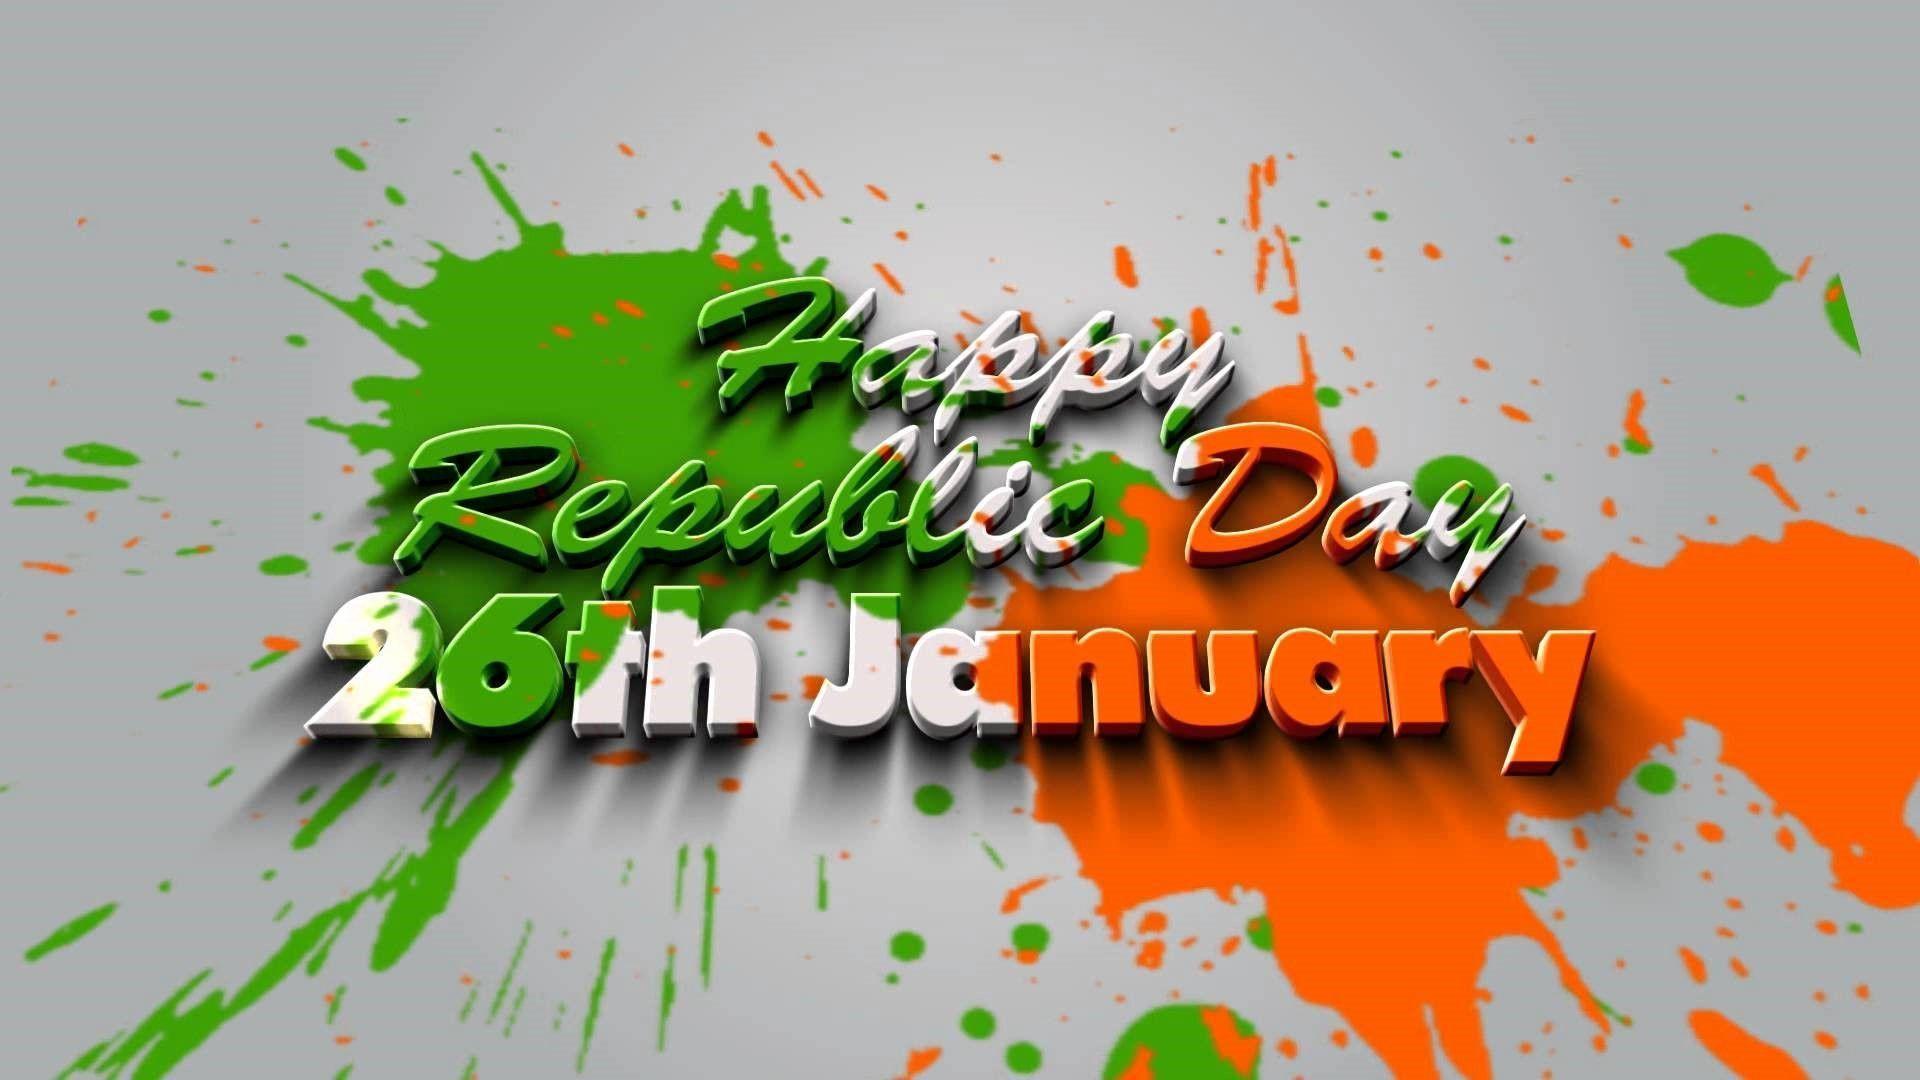 Happy Republic Day 2015 Wallpapers